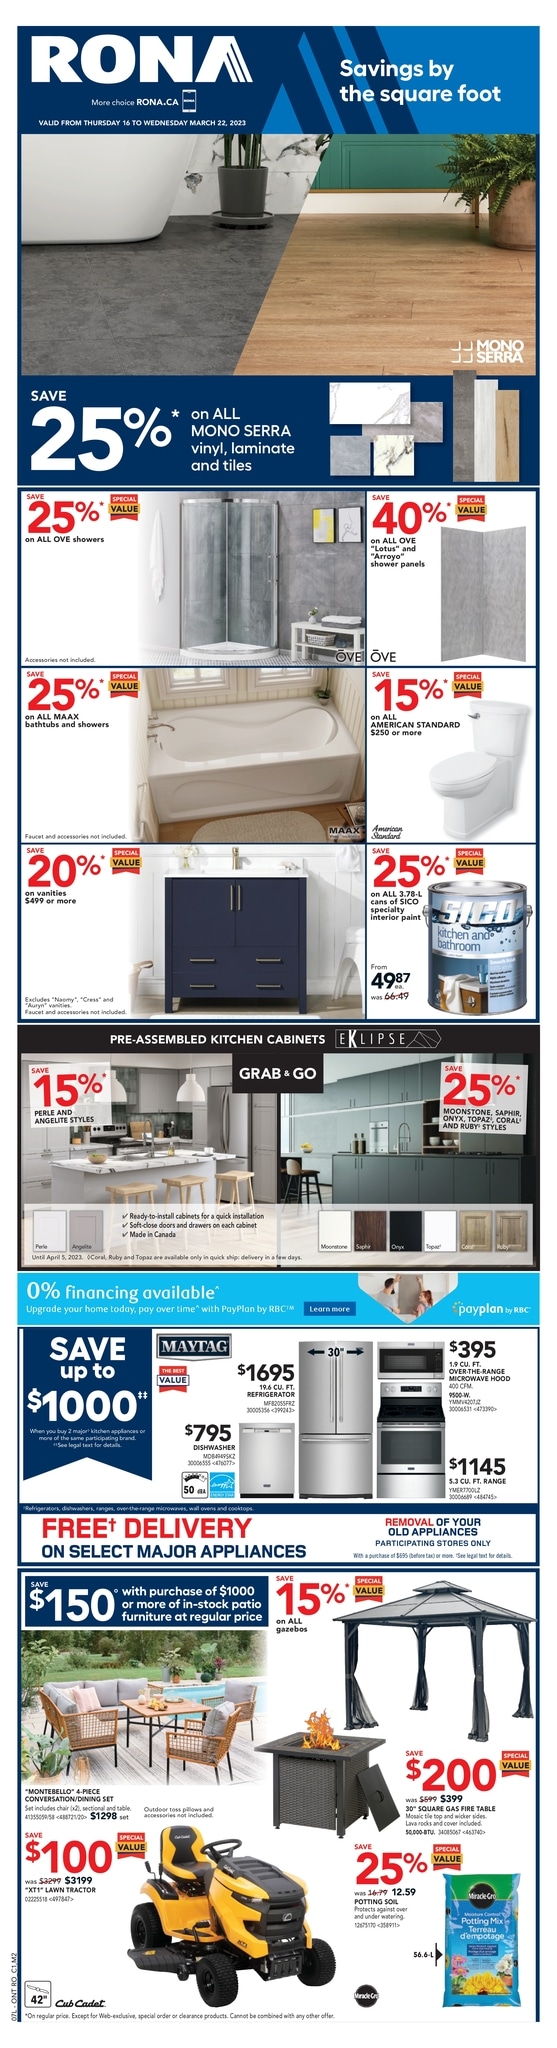 Rona - Weekly Flyer Specials - Page 1